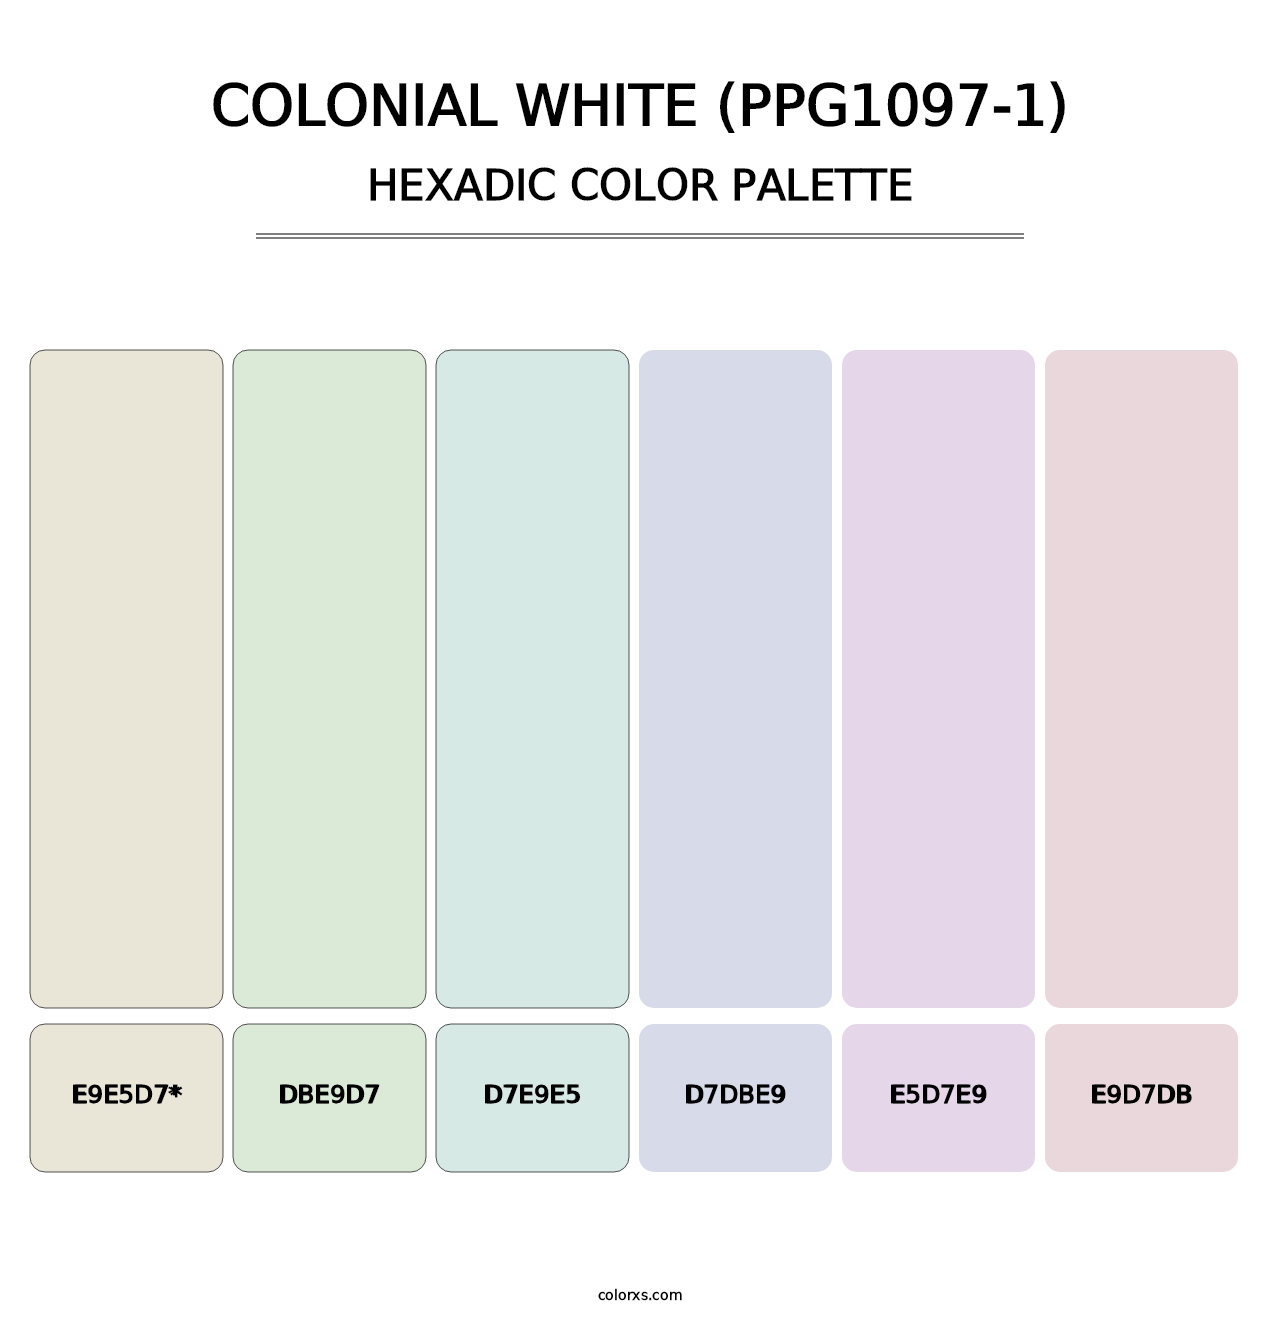 Colonial White (PPG1097-1) - Hexadic Color Palette